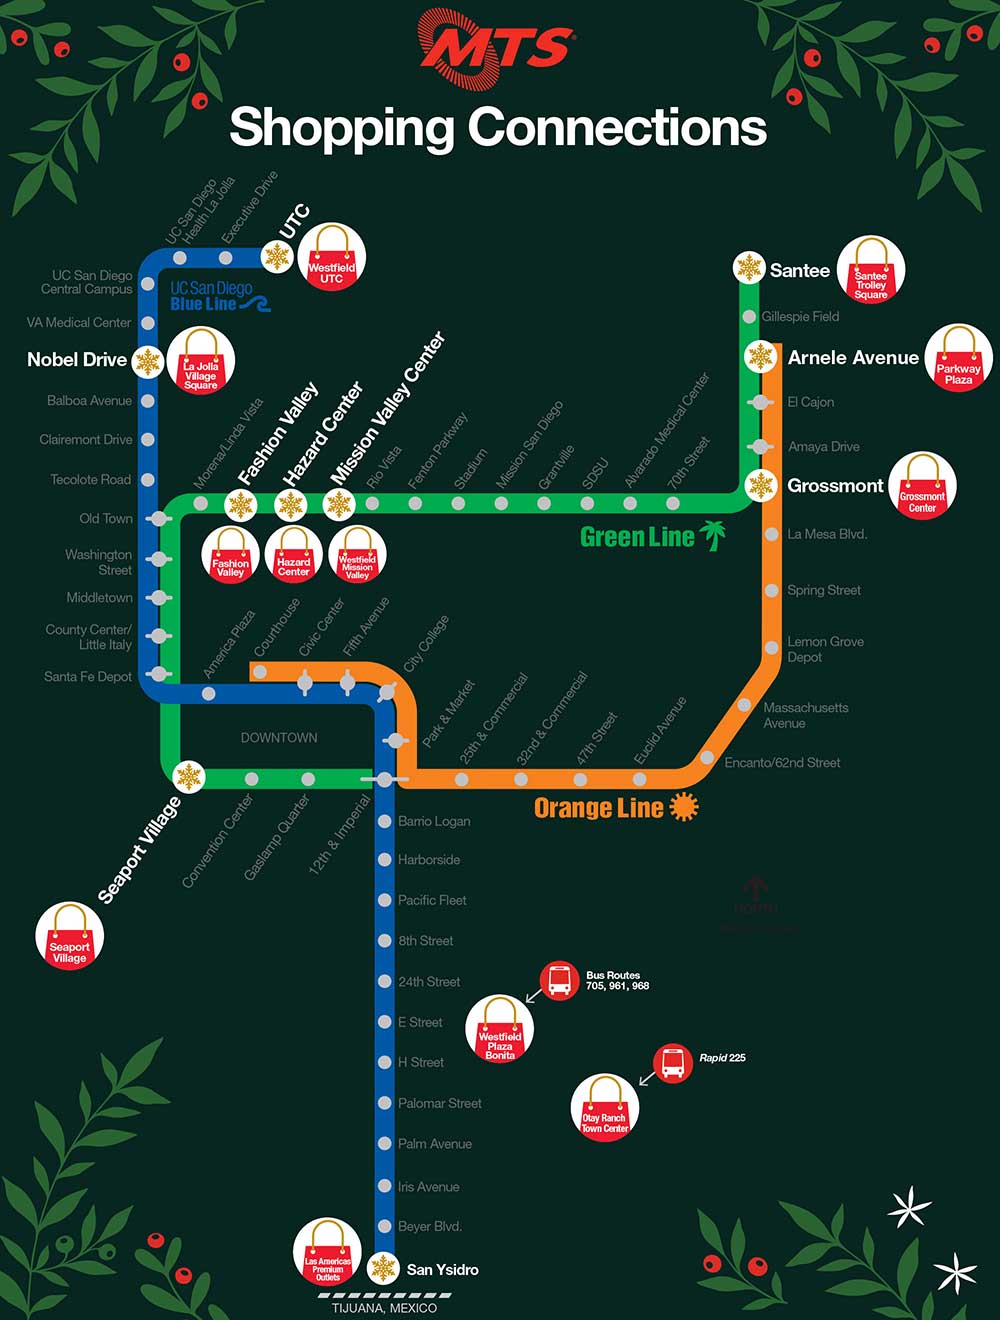 MTS Shopping Connections Map - San Diego